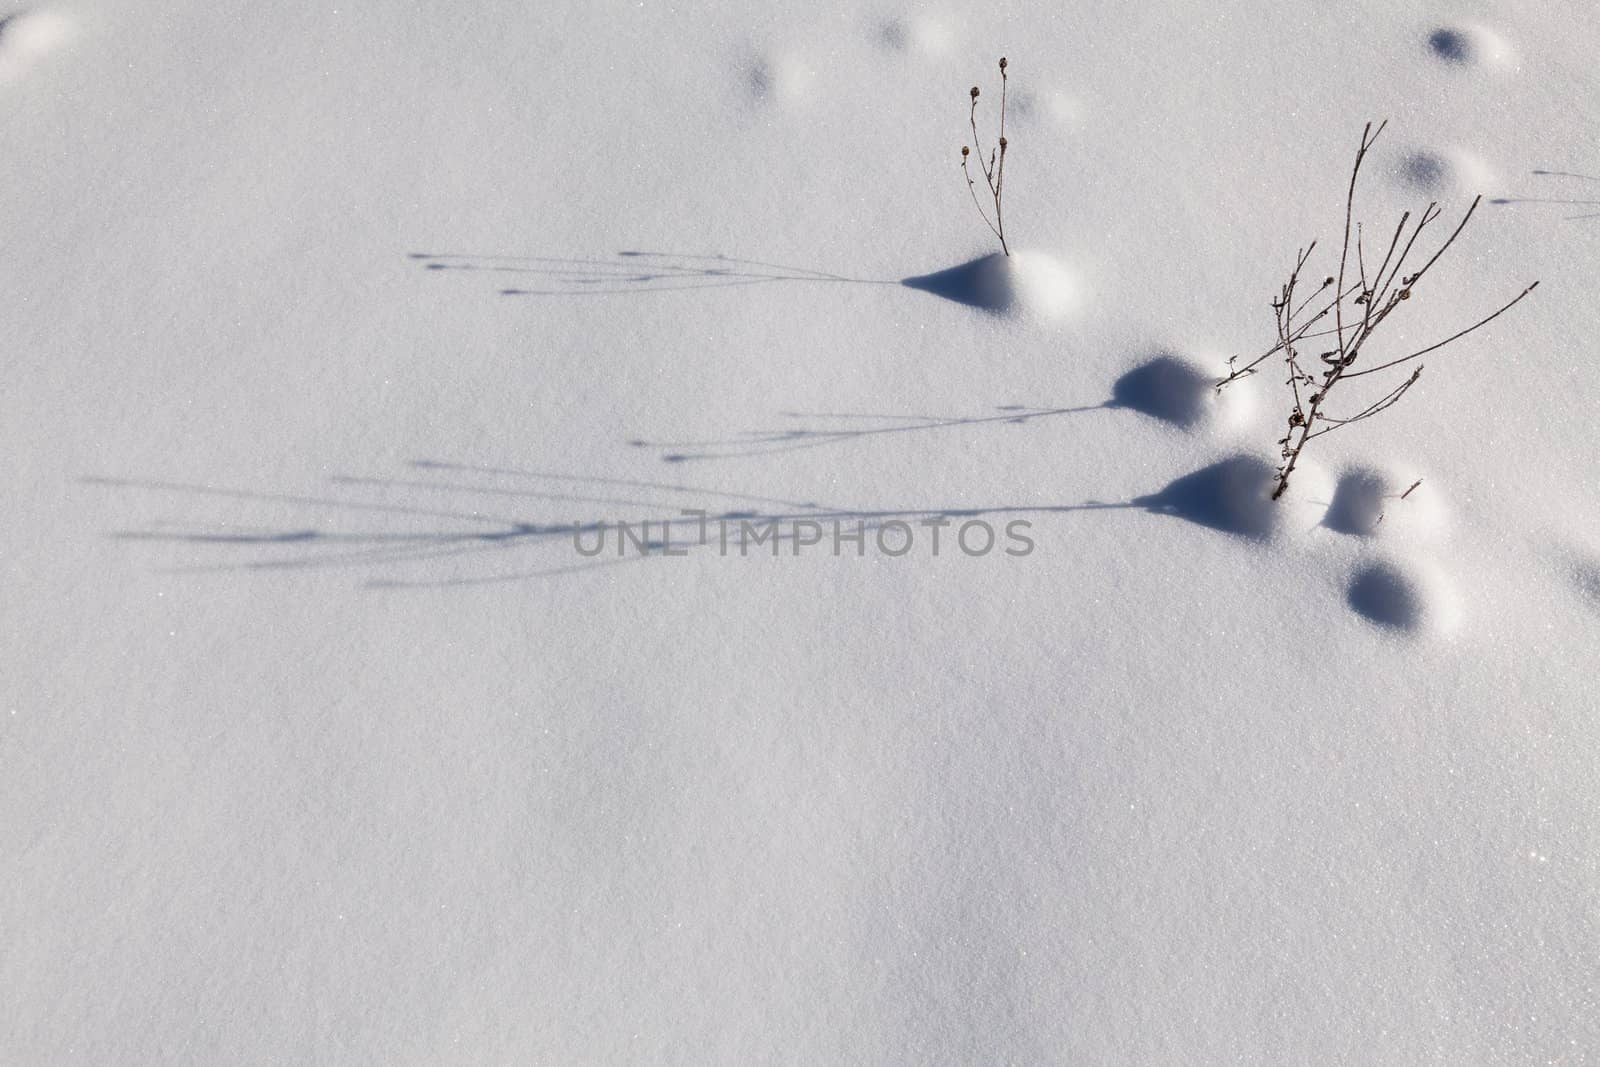 Image of snowbound field with plants casting shadows. Outdoor photo